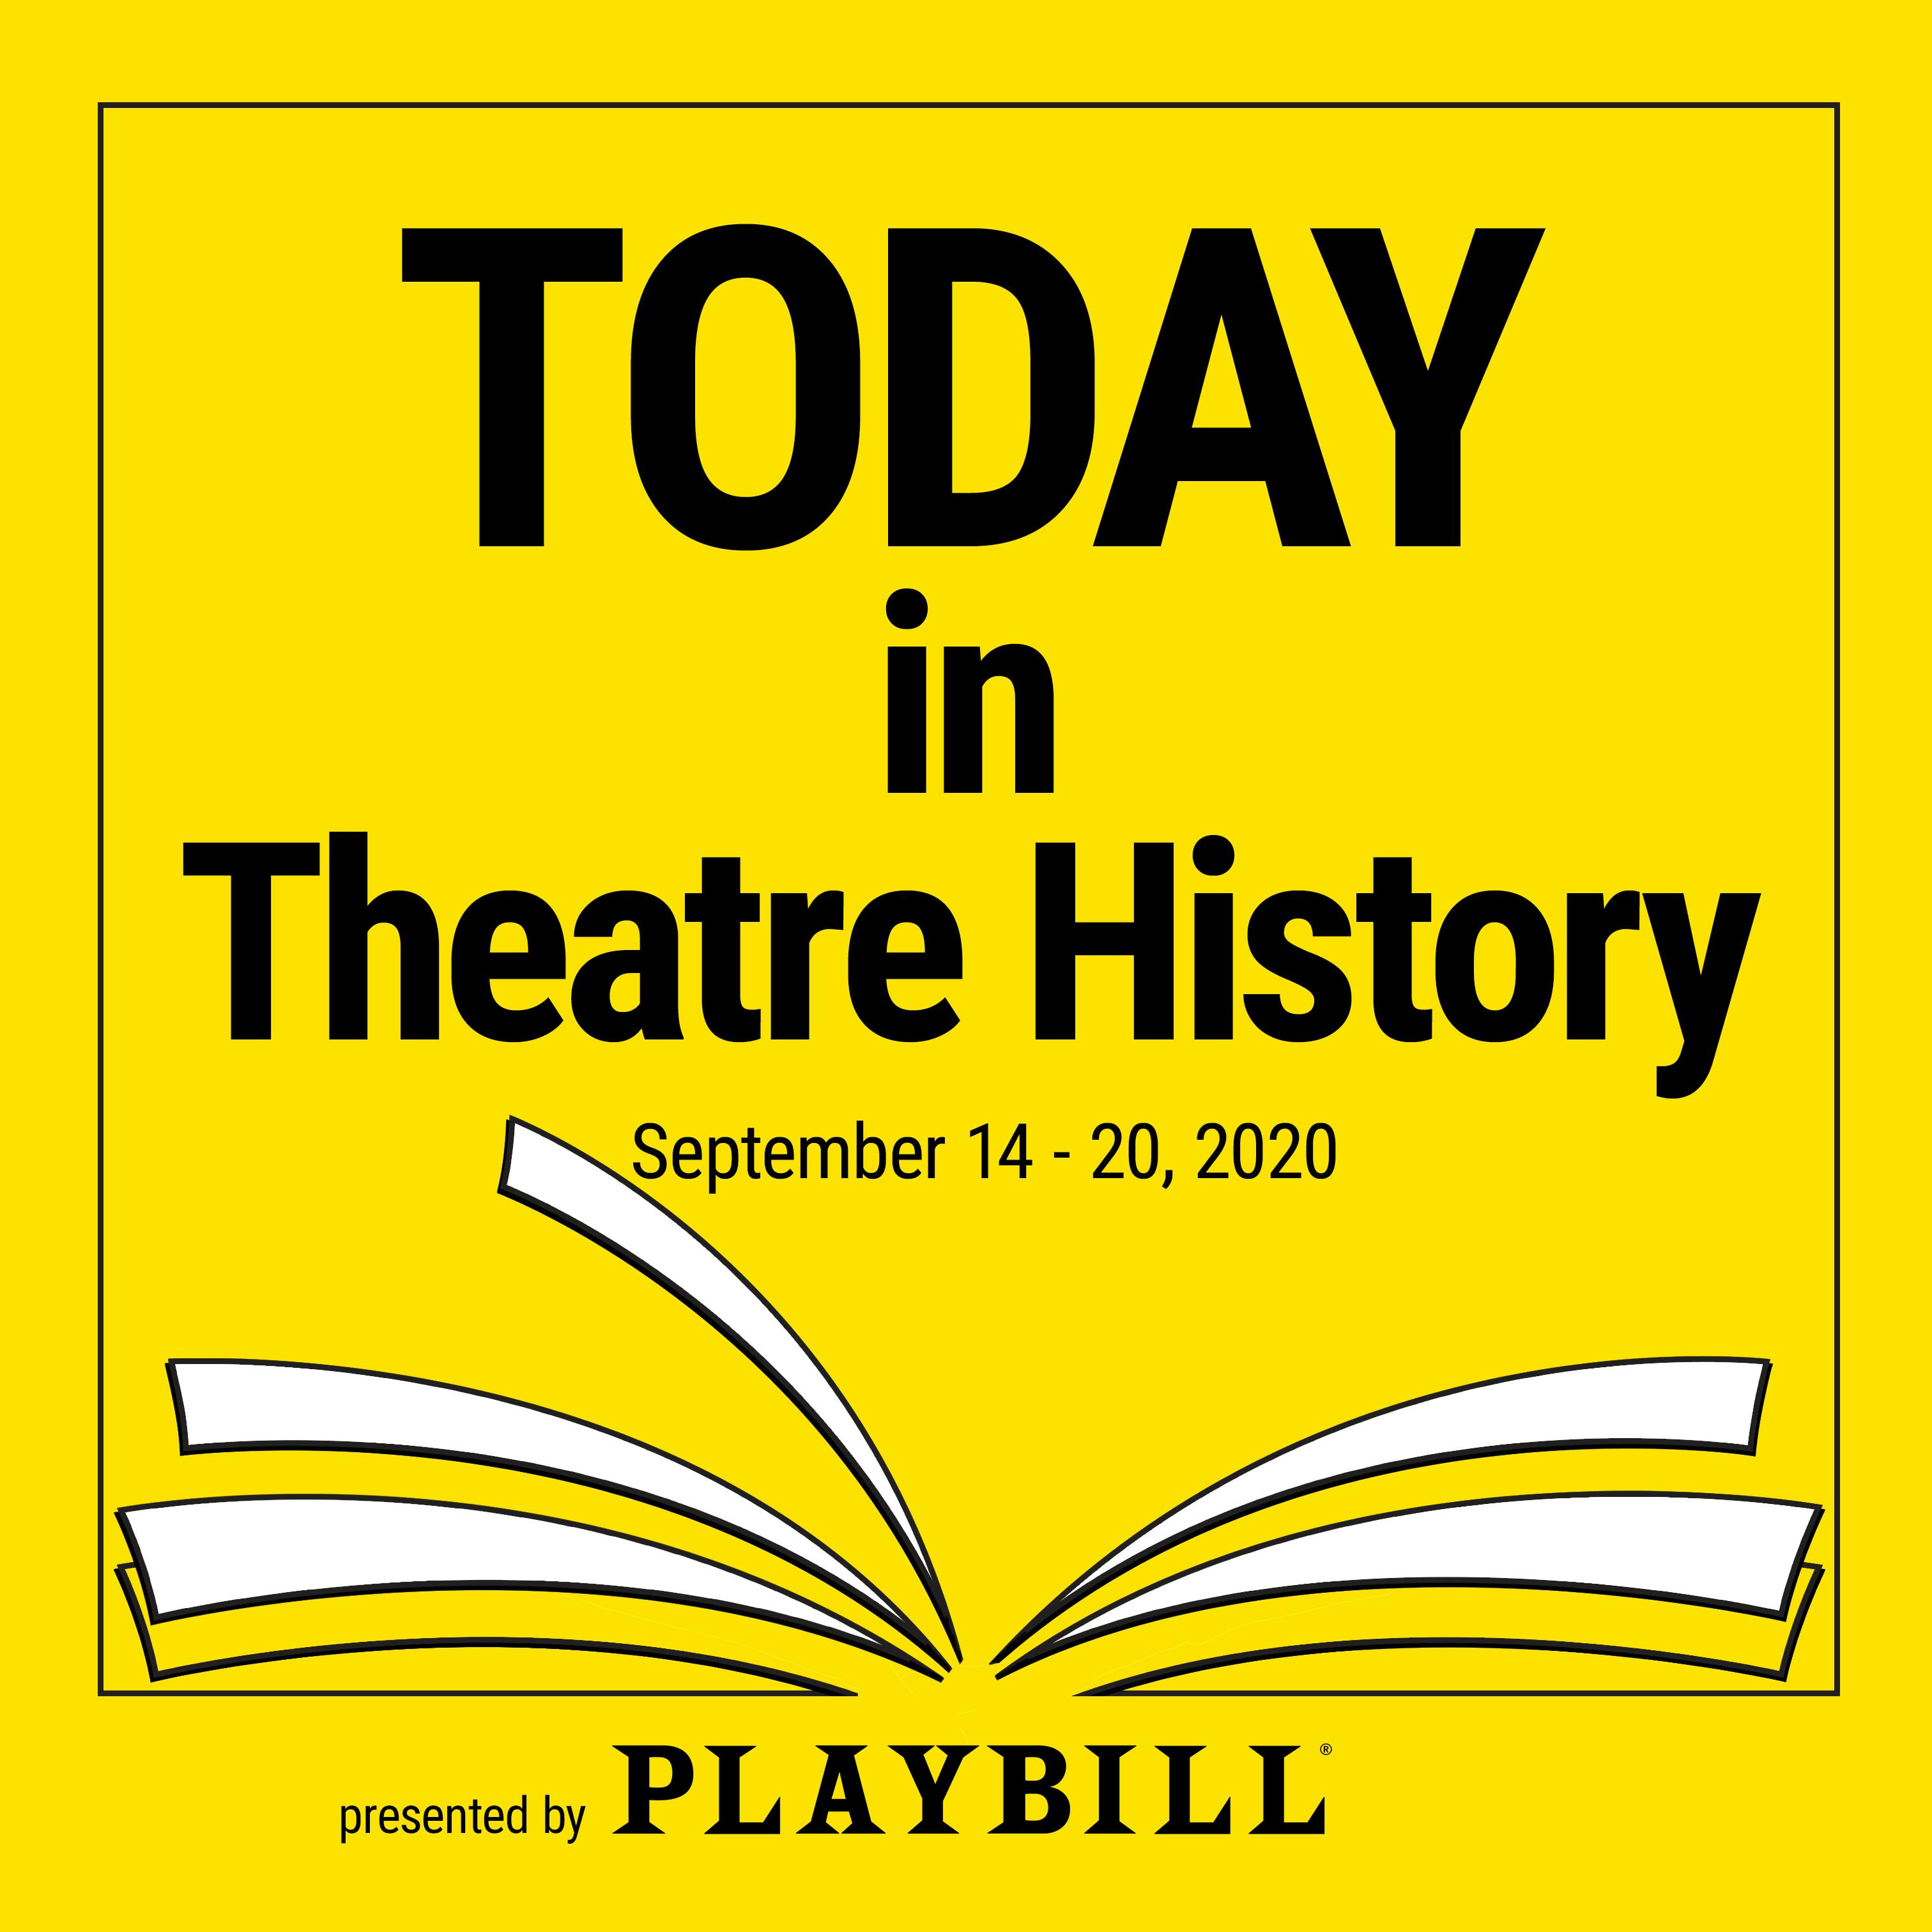 September 14–20, 2020: Happy birthday, Bacall! Also, Song & Dance opens, eventually winning Bernadette Peters her first Tony, and The Threepenny Opera becomes an Off-Broadway hit.